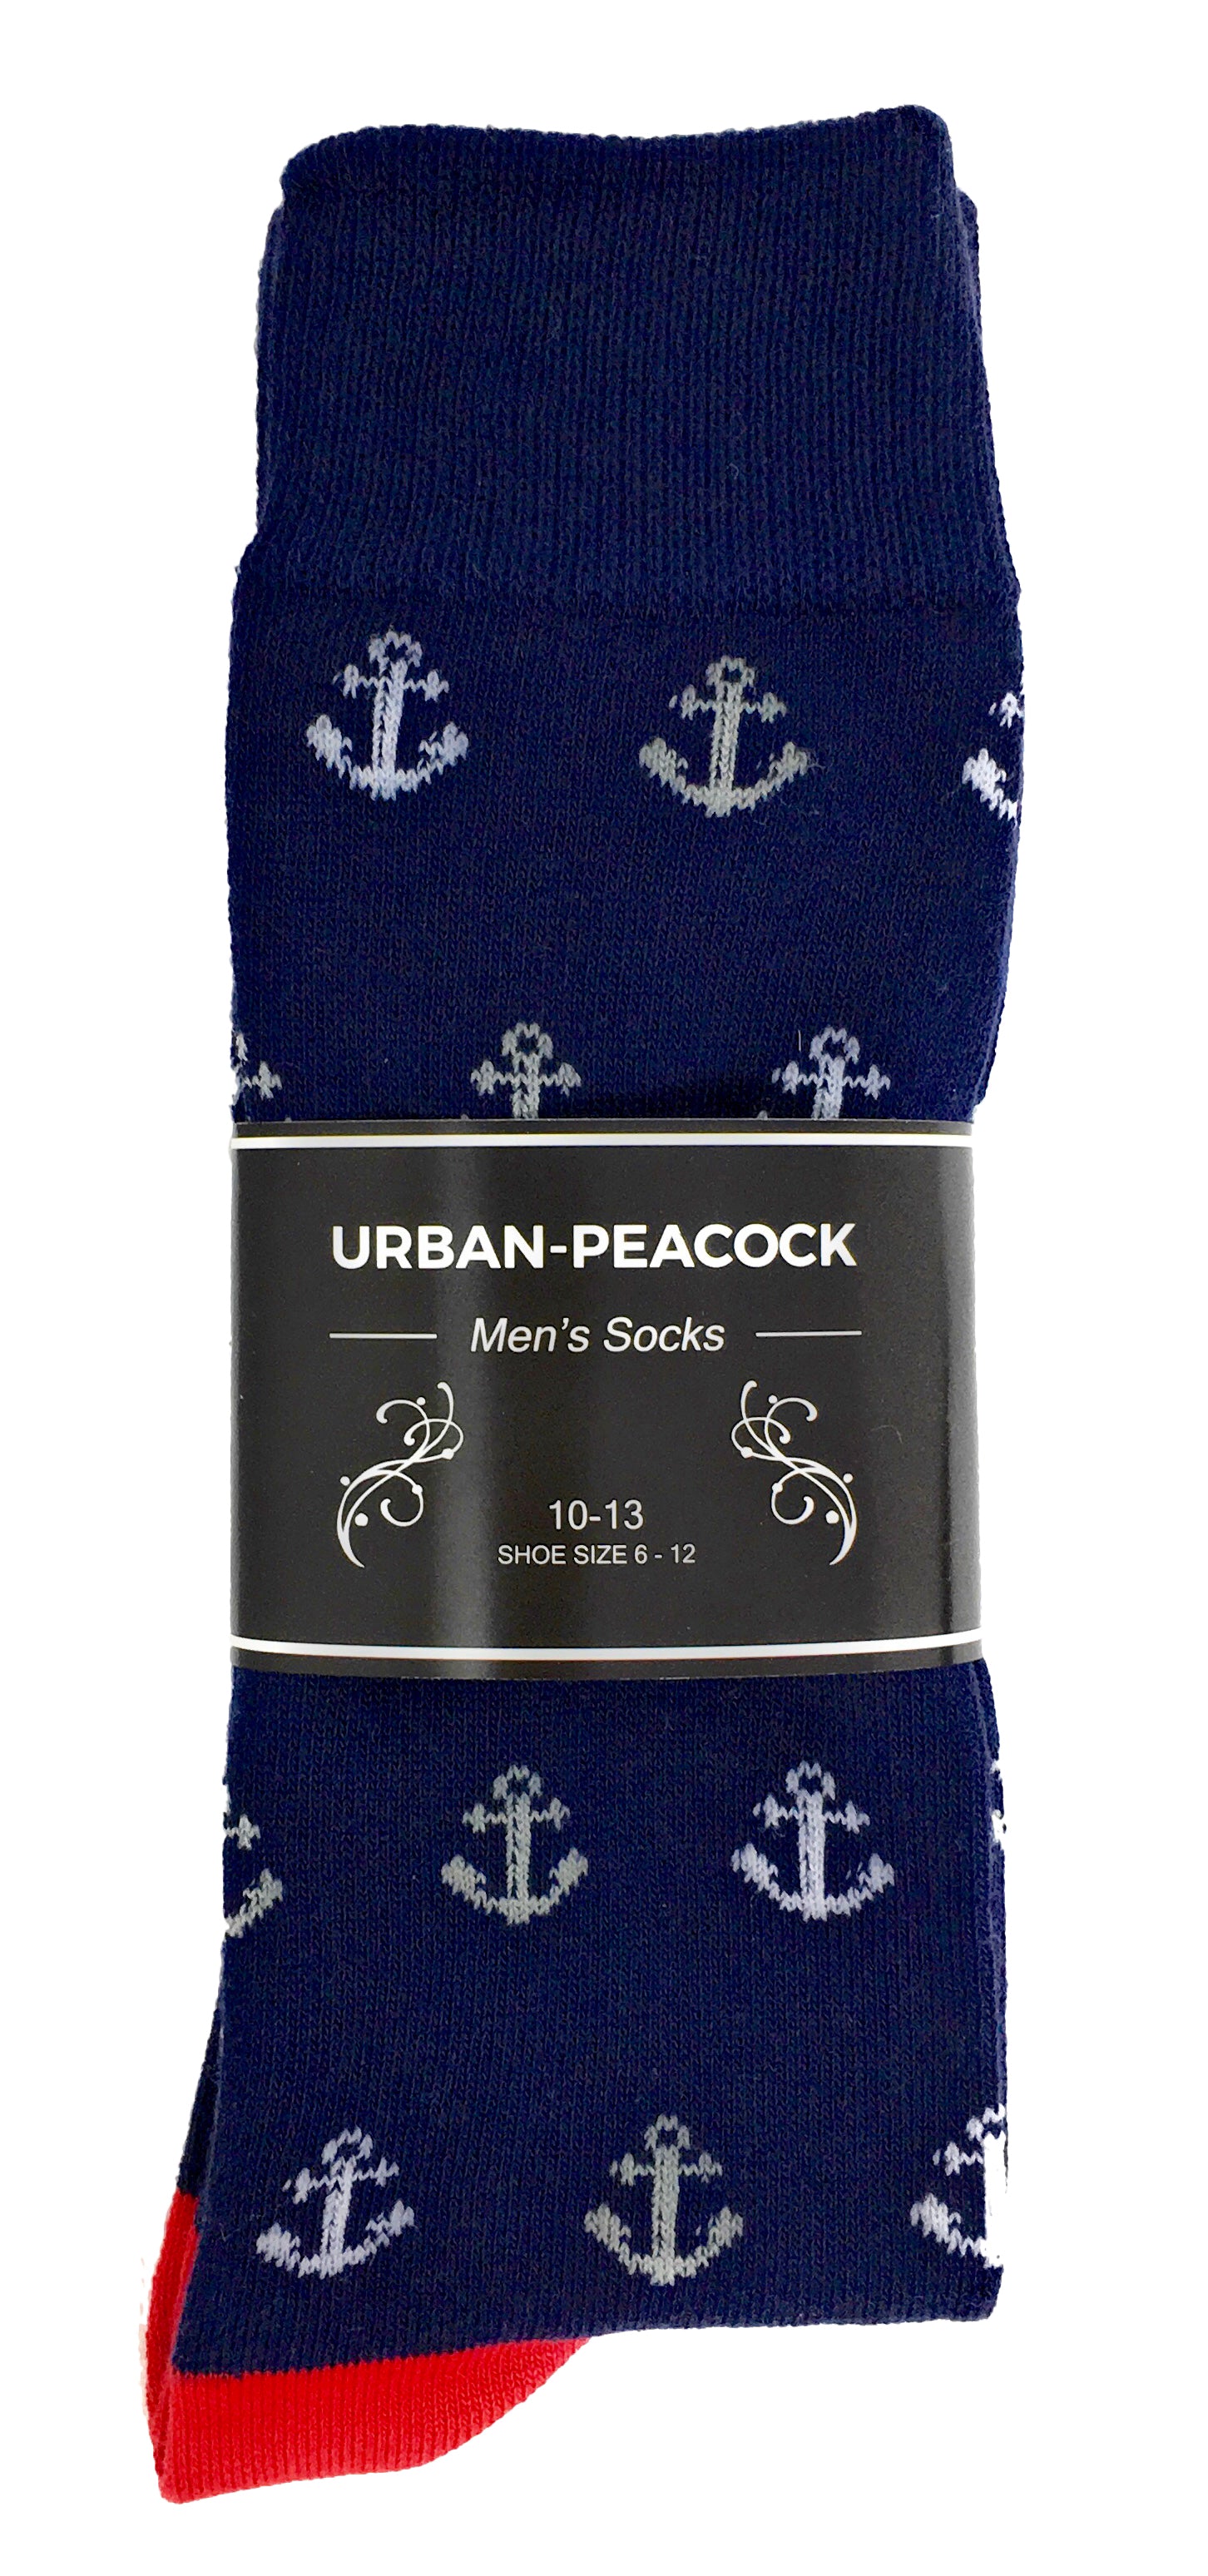 Black Label Men's Dress Socks - Anchors - Navy with Red